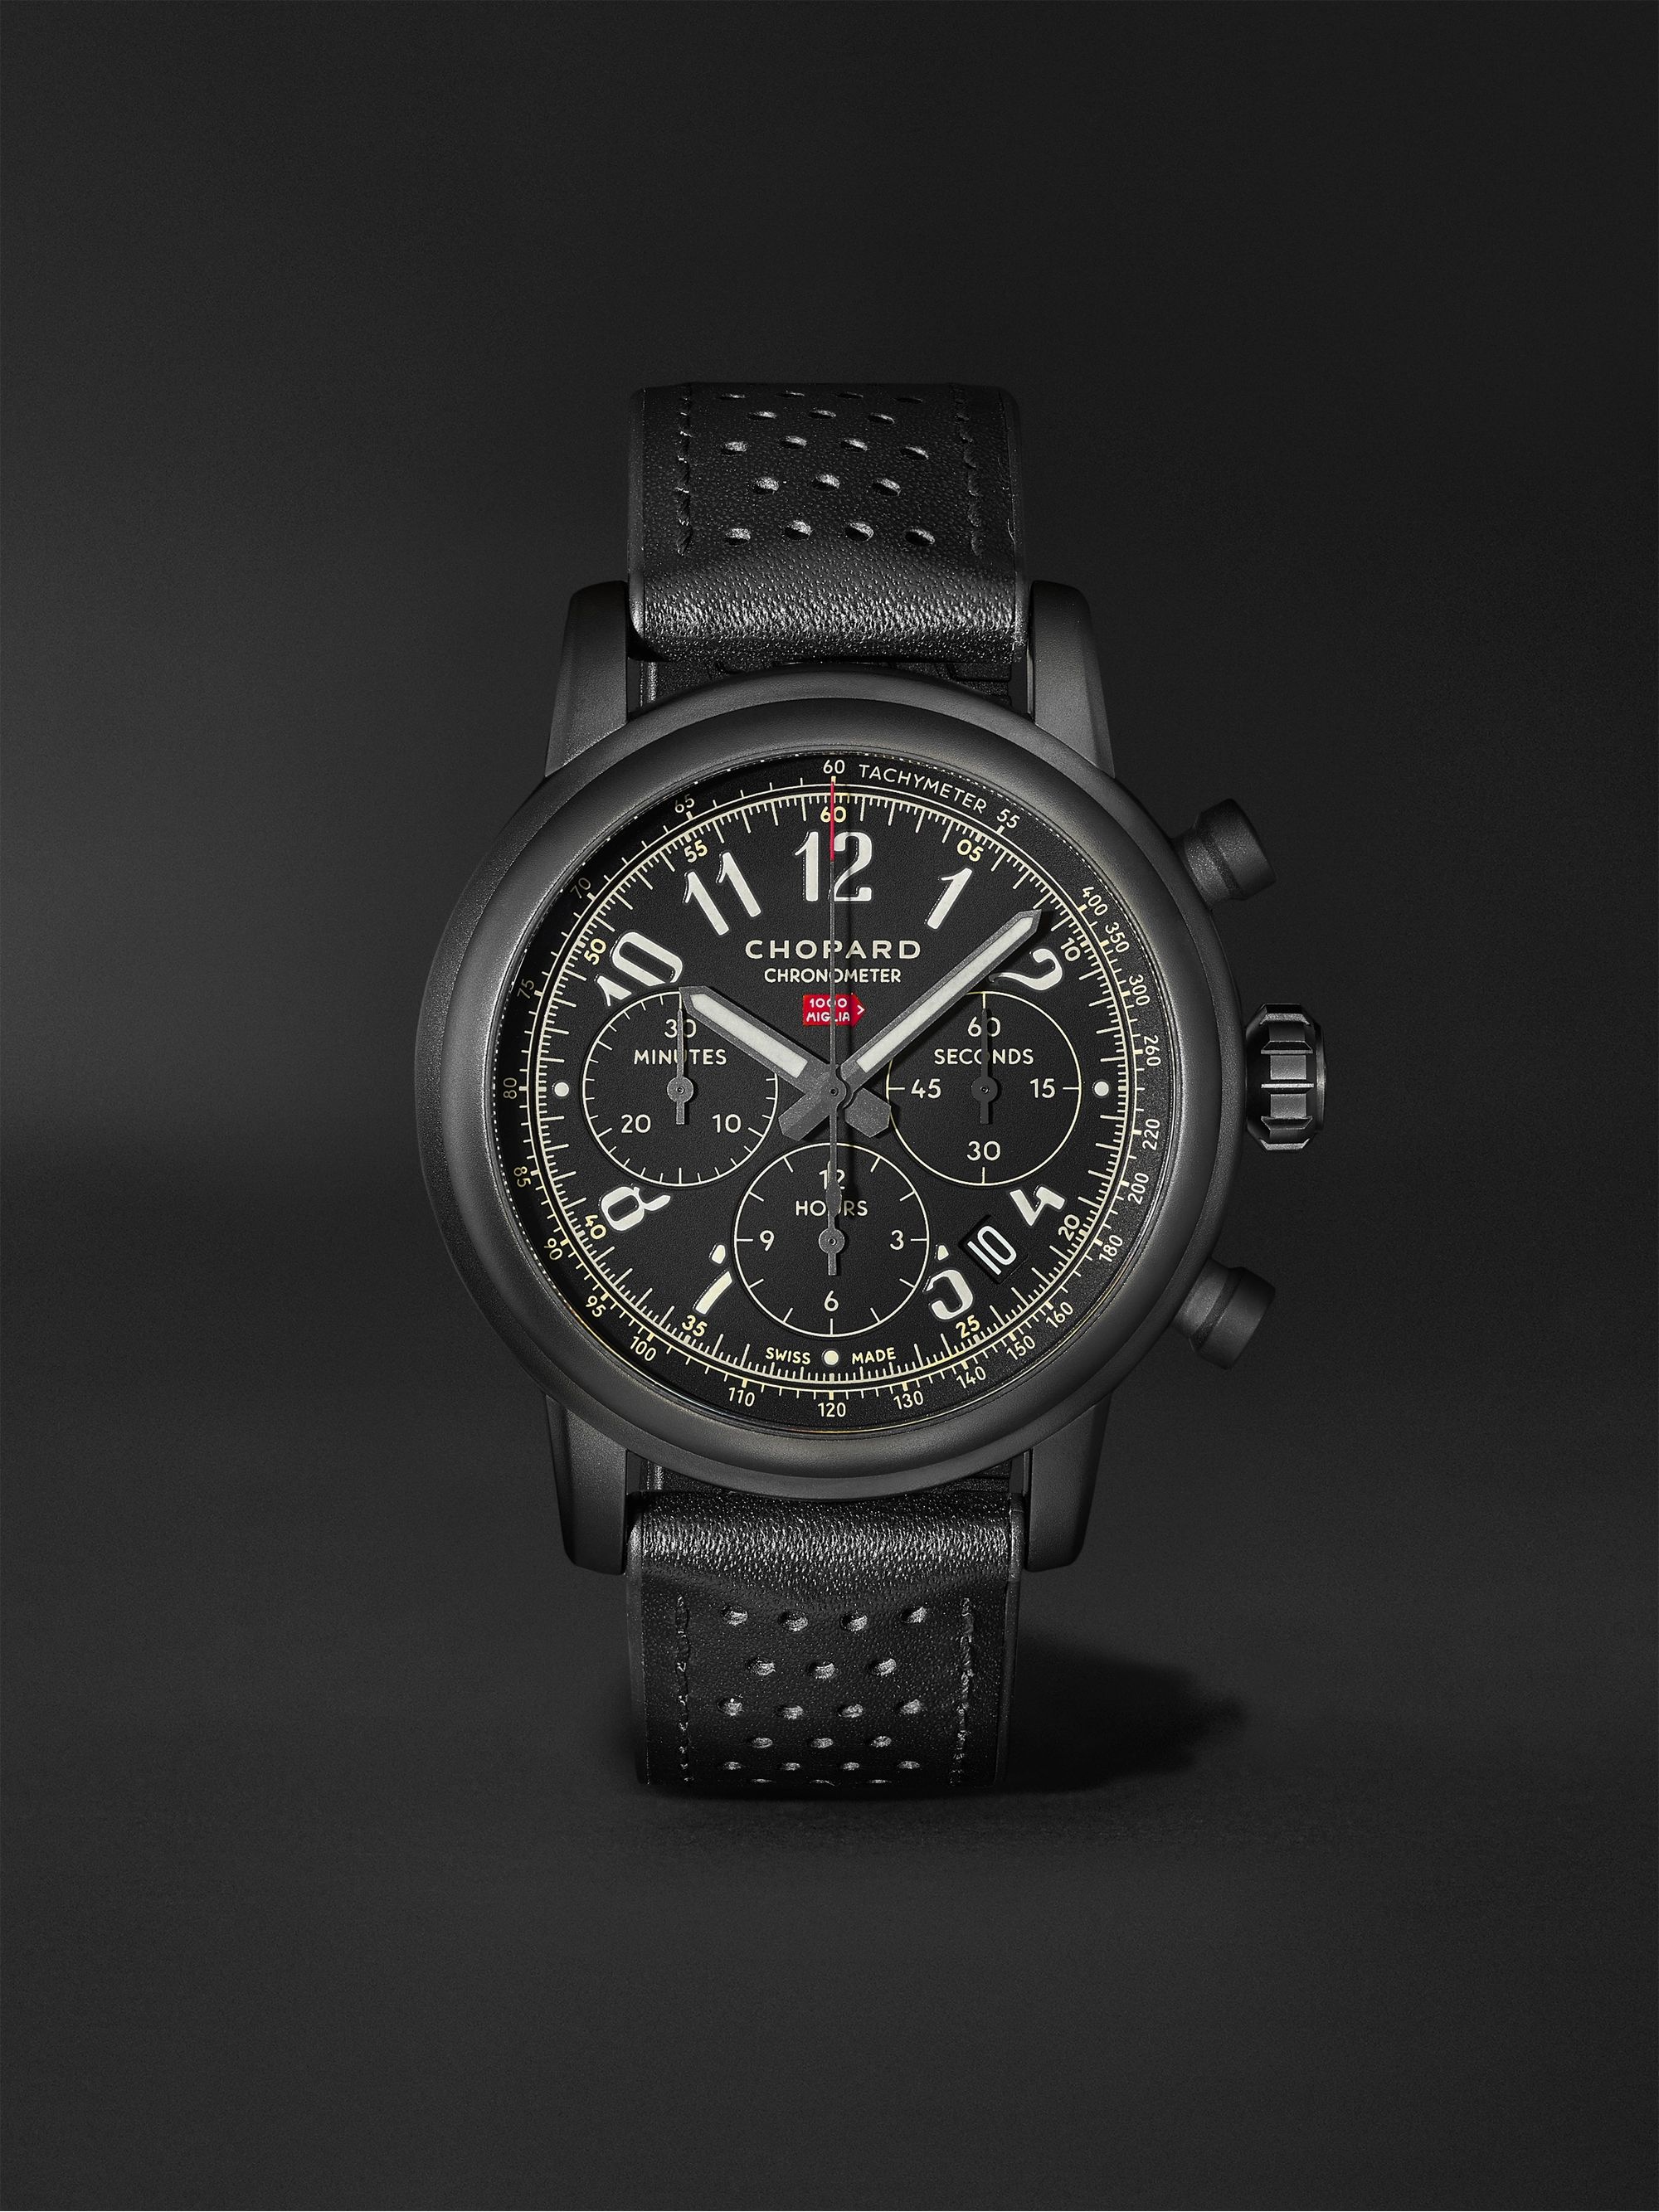 CHOPARD Mille Miglia 2020 Race Edition Limited Edition Automatic  Chronograph 42mm Stainless Steel and Leather Watch, Ref. No. 168589-3028 |  MR PORTER